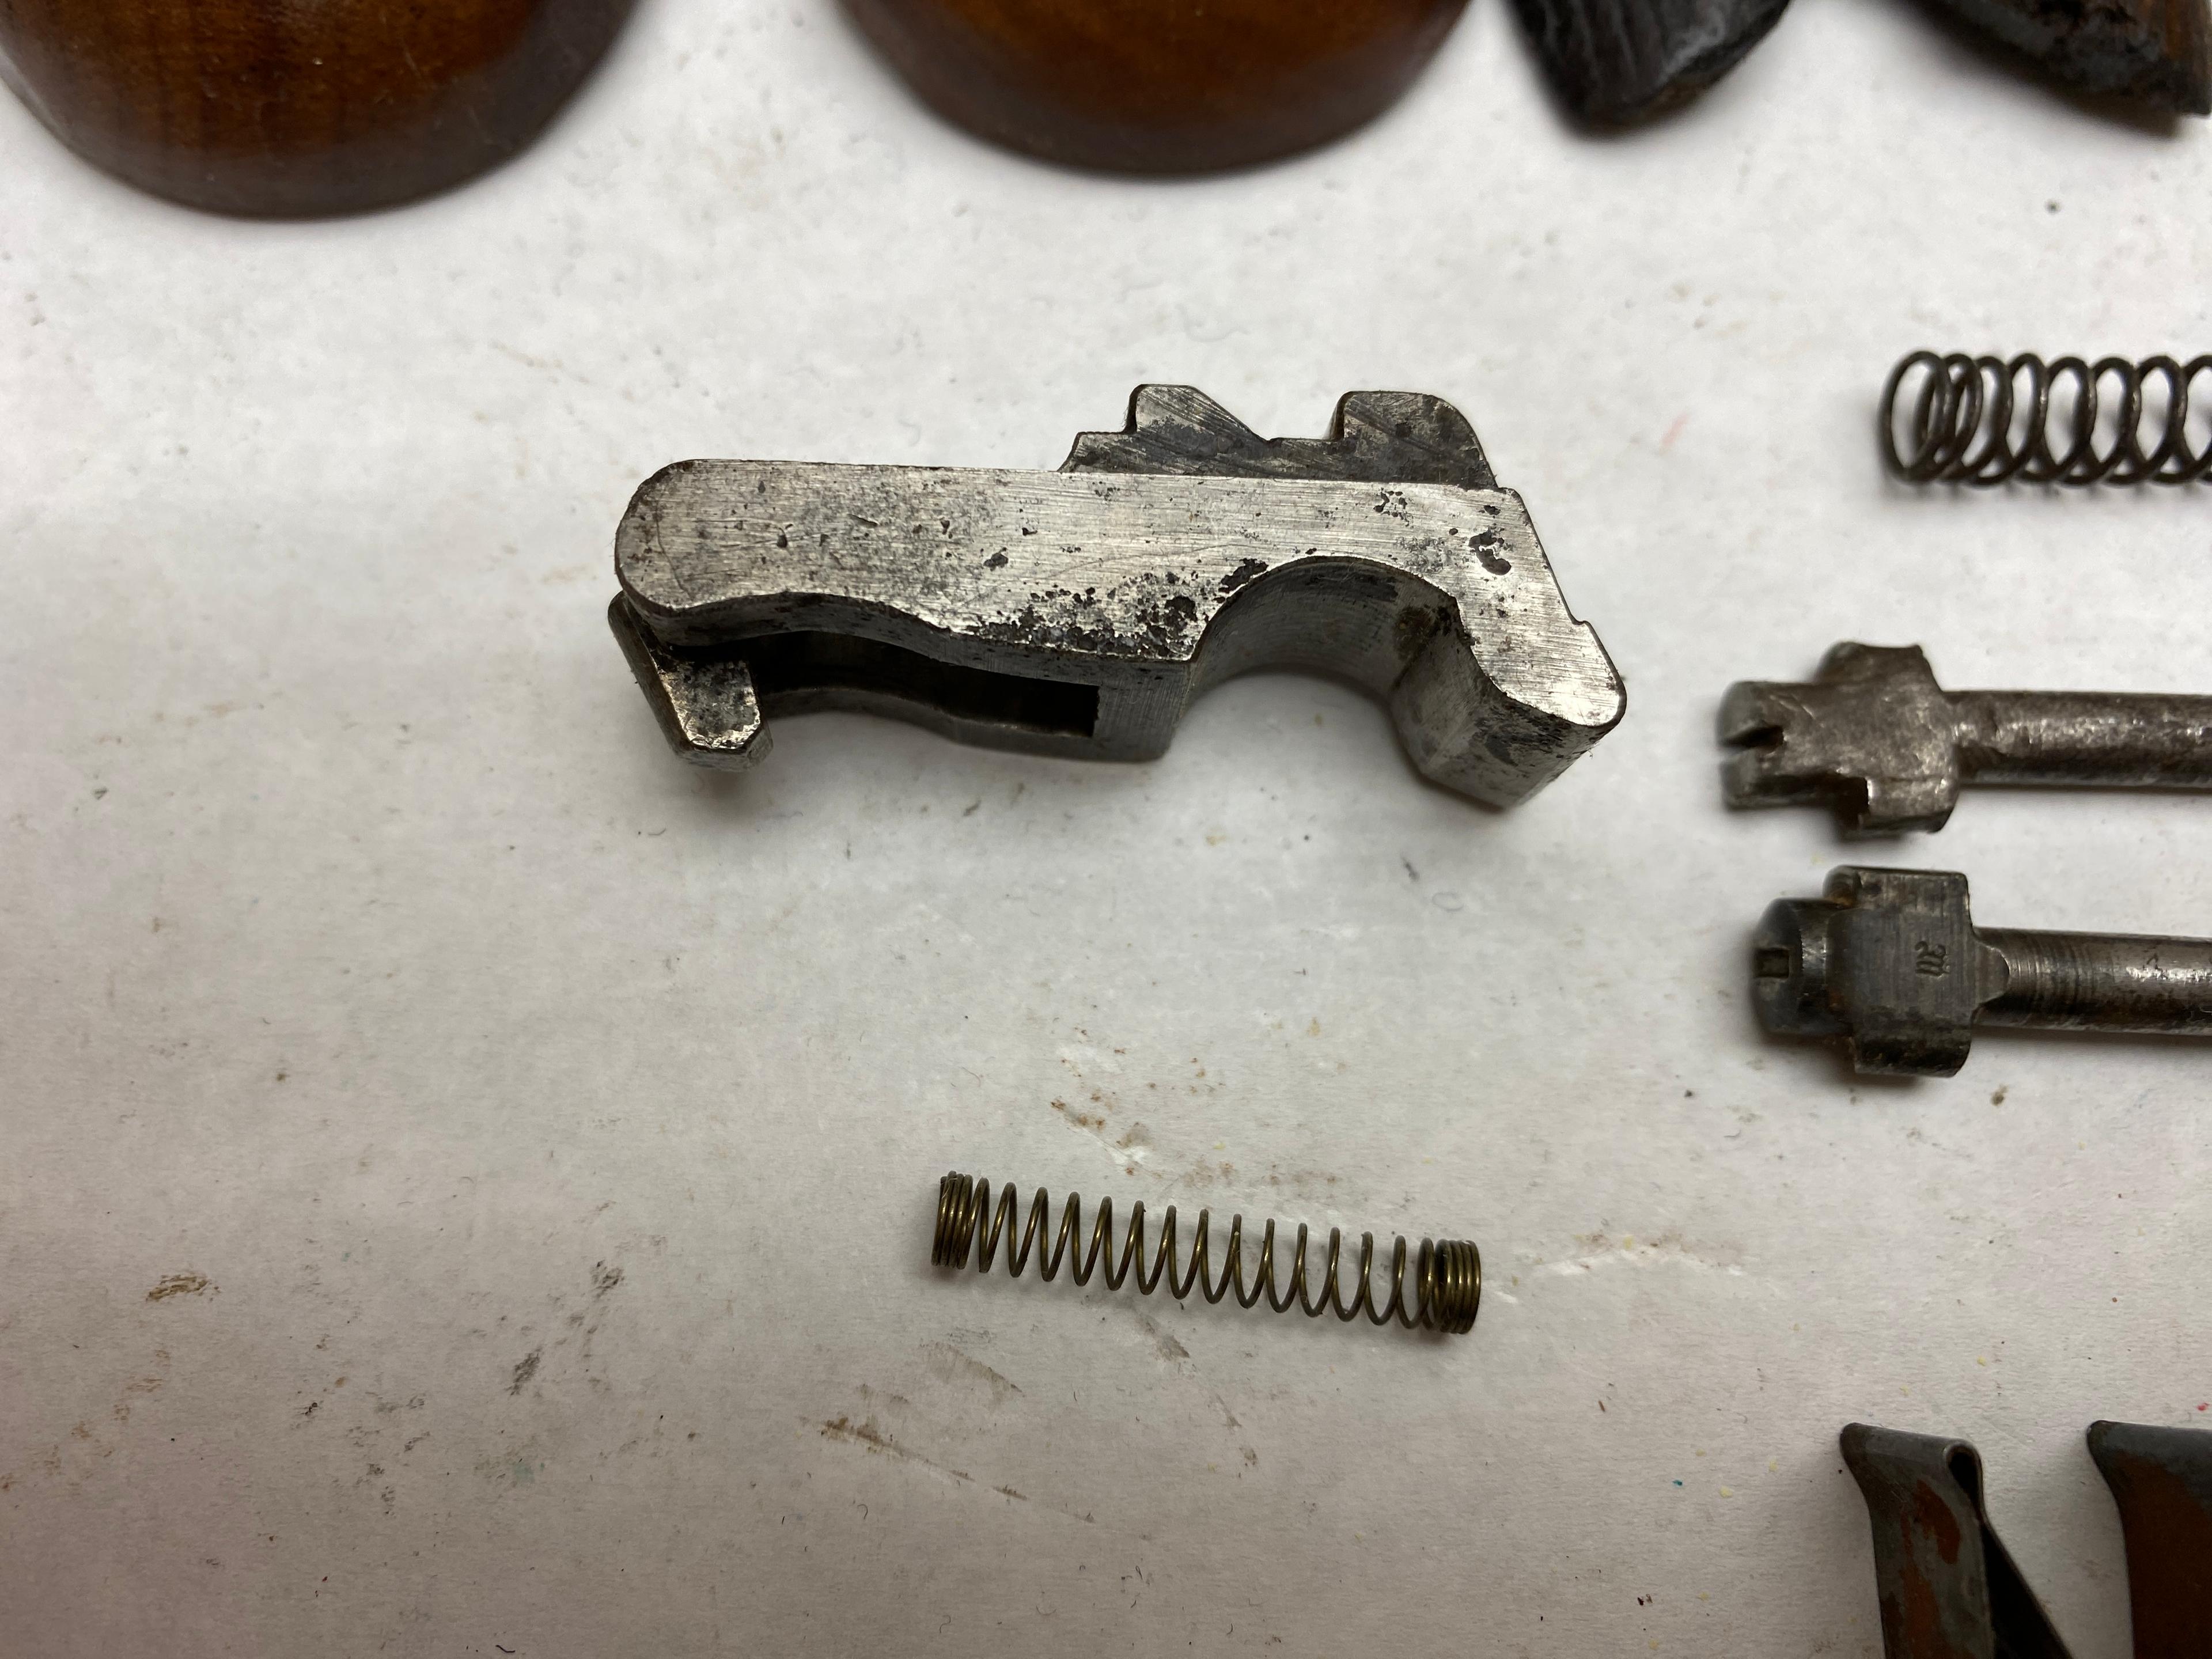 MAUSER C96 AND P-08 LUGER PARTS